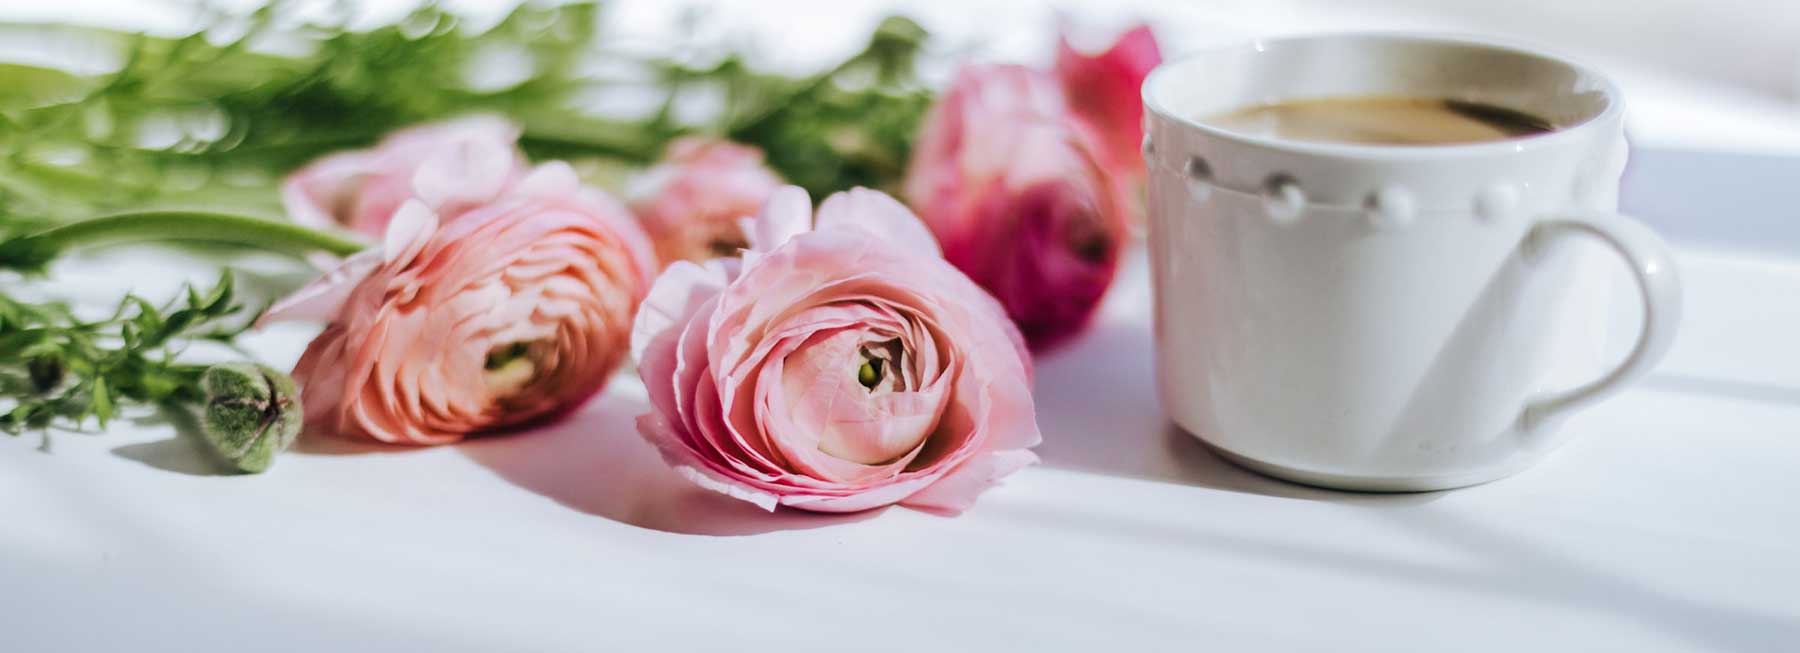 Pink ranunculus lying on a white counter next to a white ceramic coffee cup filled with coffee and cream.